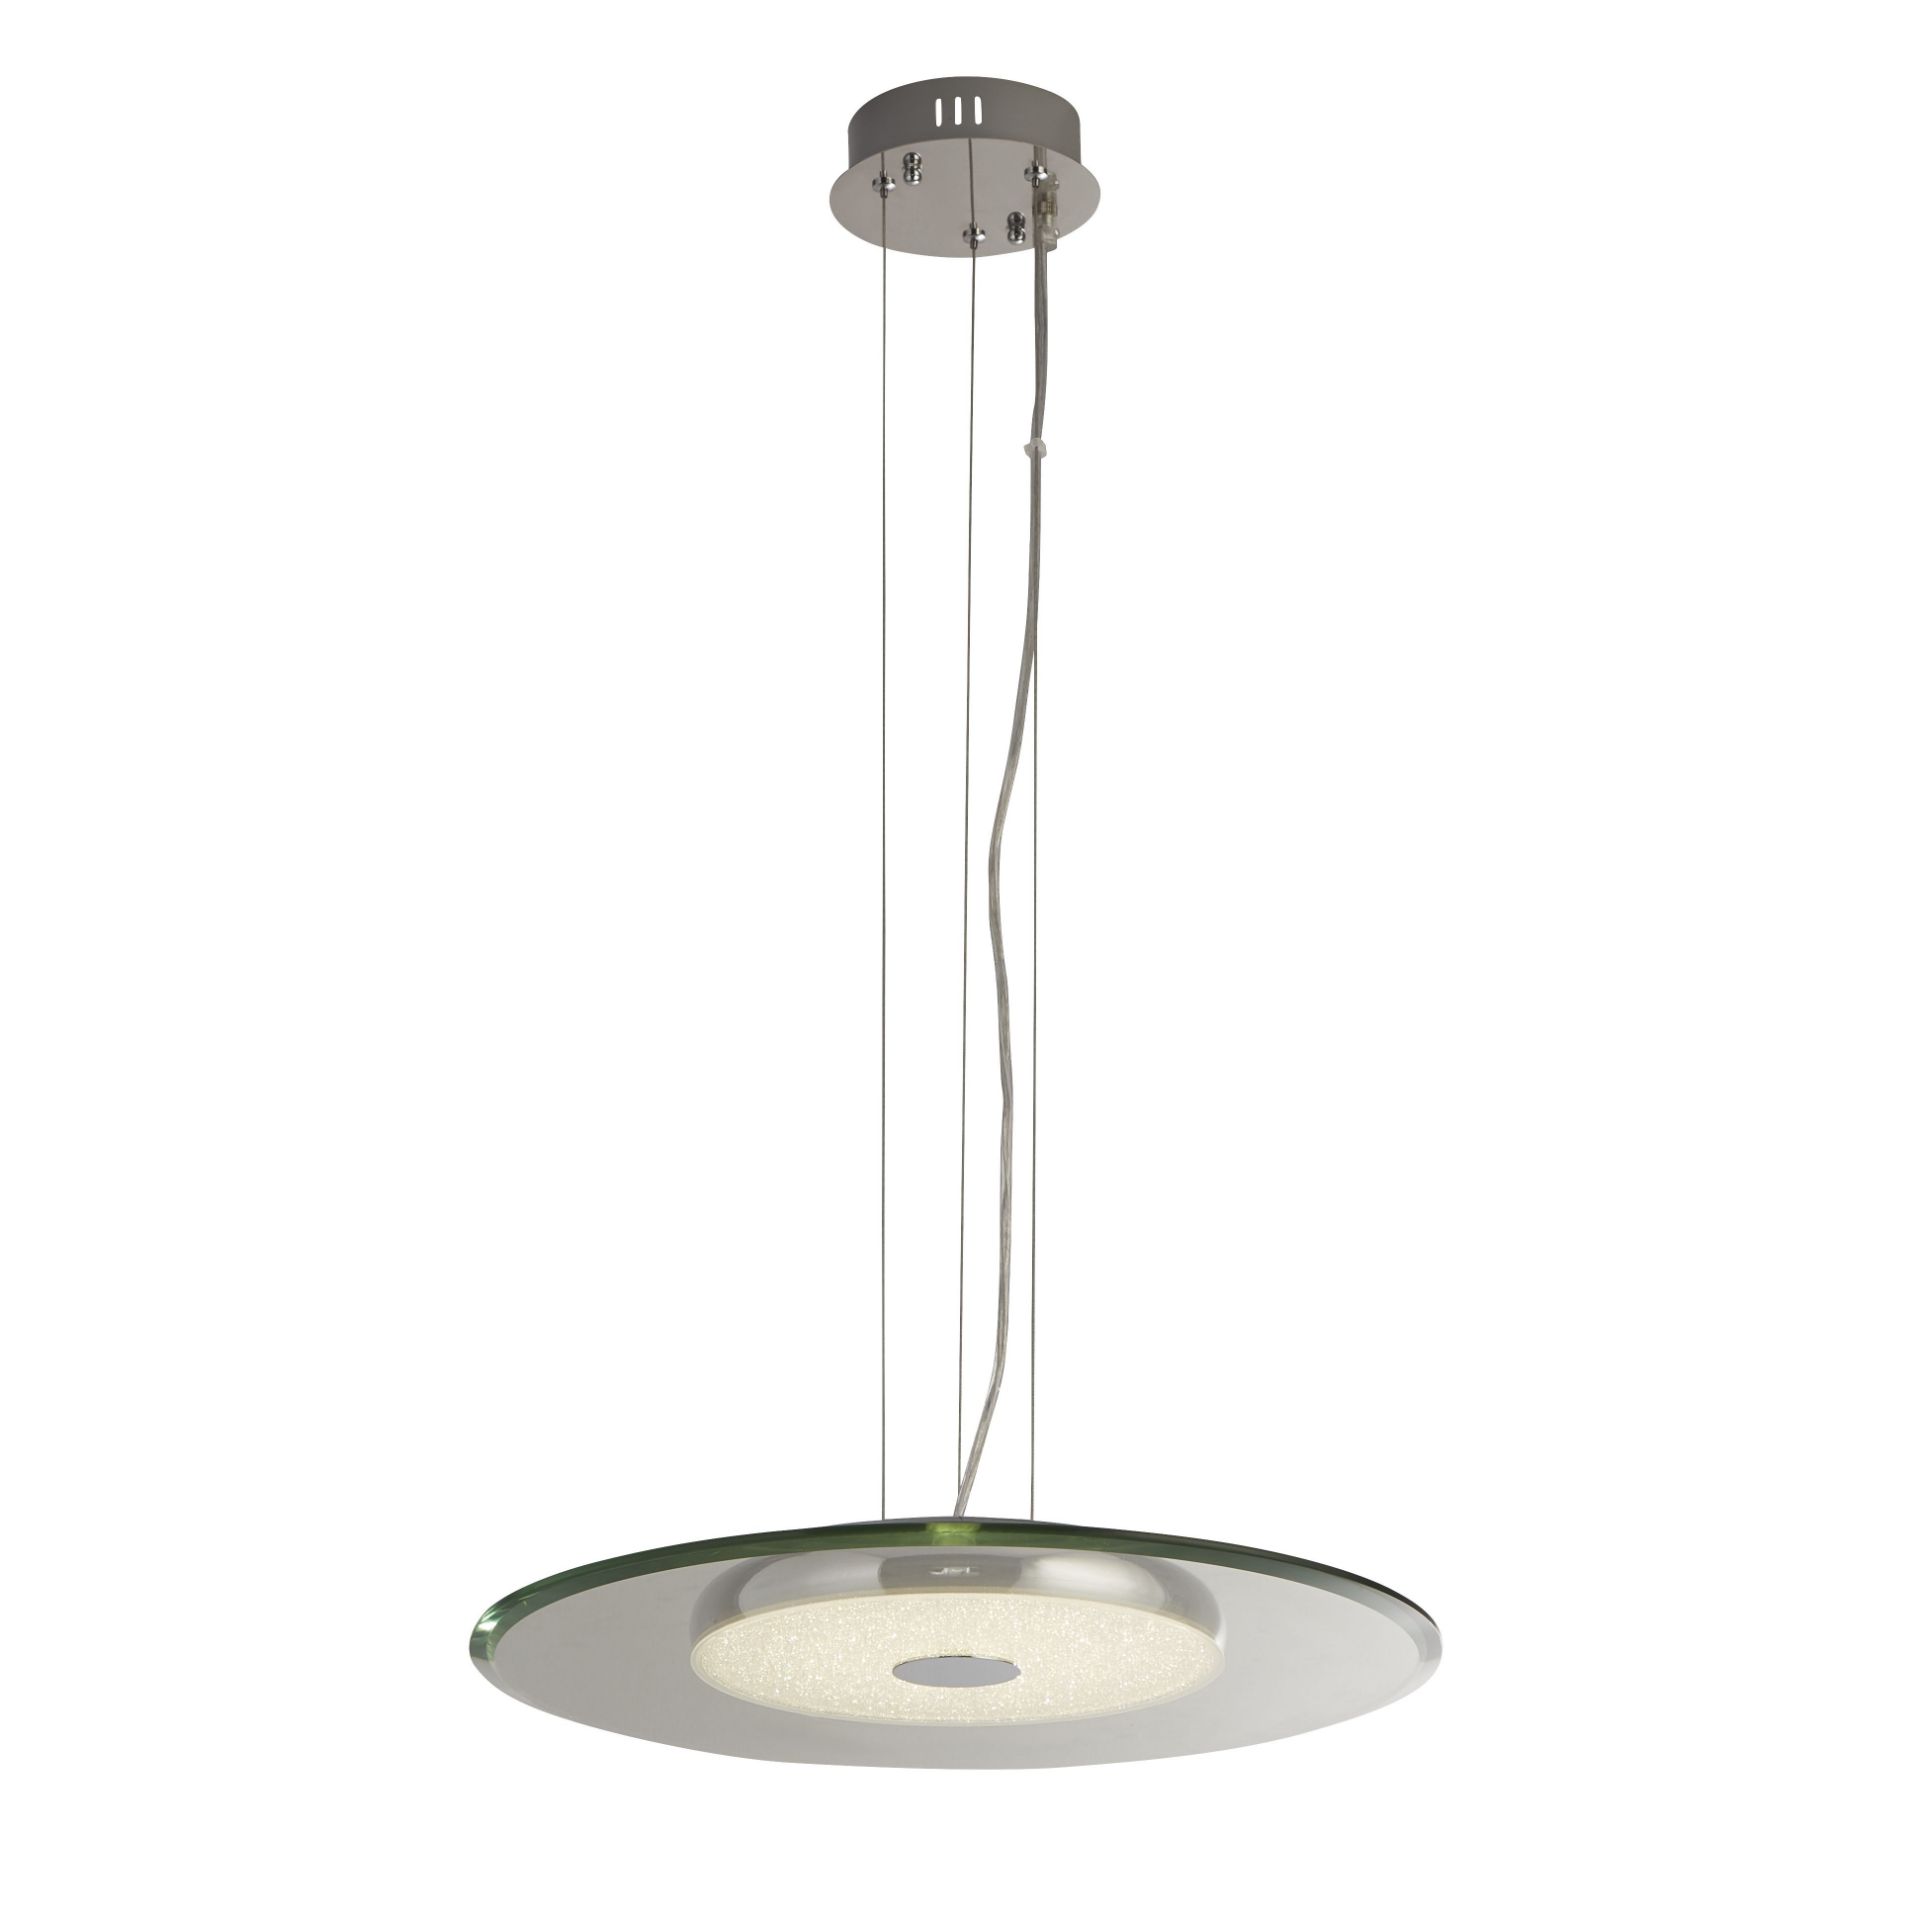 HEIGHT ADJUSTABLE CHROME, GLASS AND CRYSTAL SAND LED CEILING PENDANT, 16W, 125CM HIGHT. RRP £146.